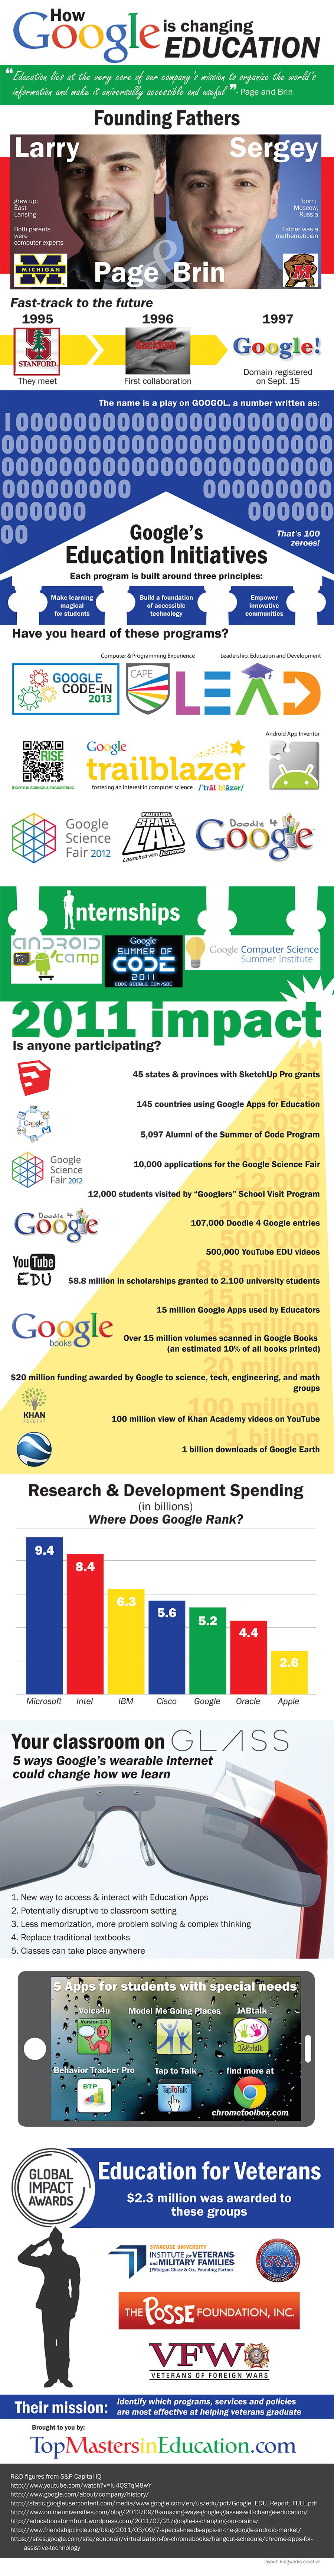 How Google is Changing Education